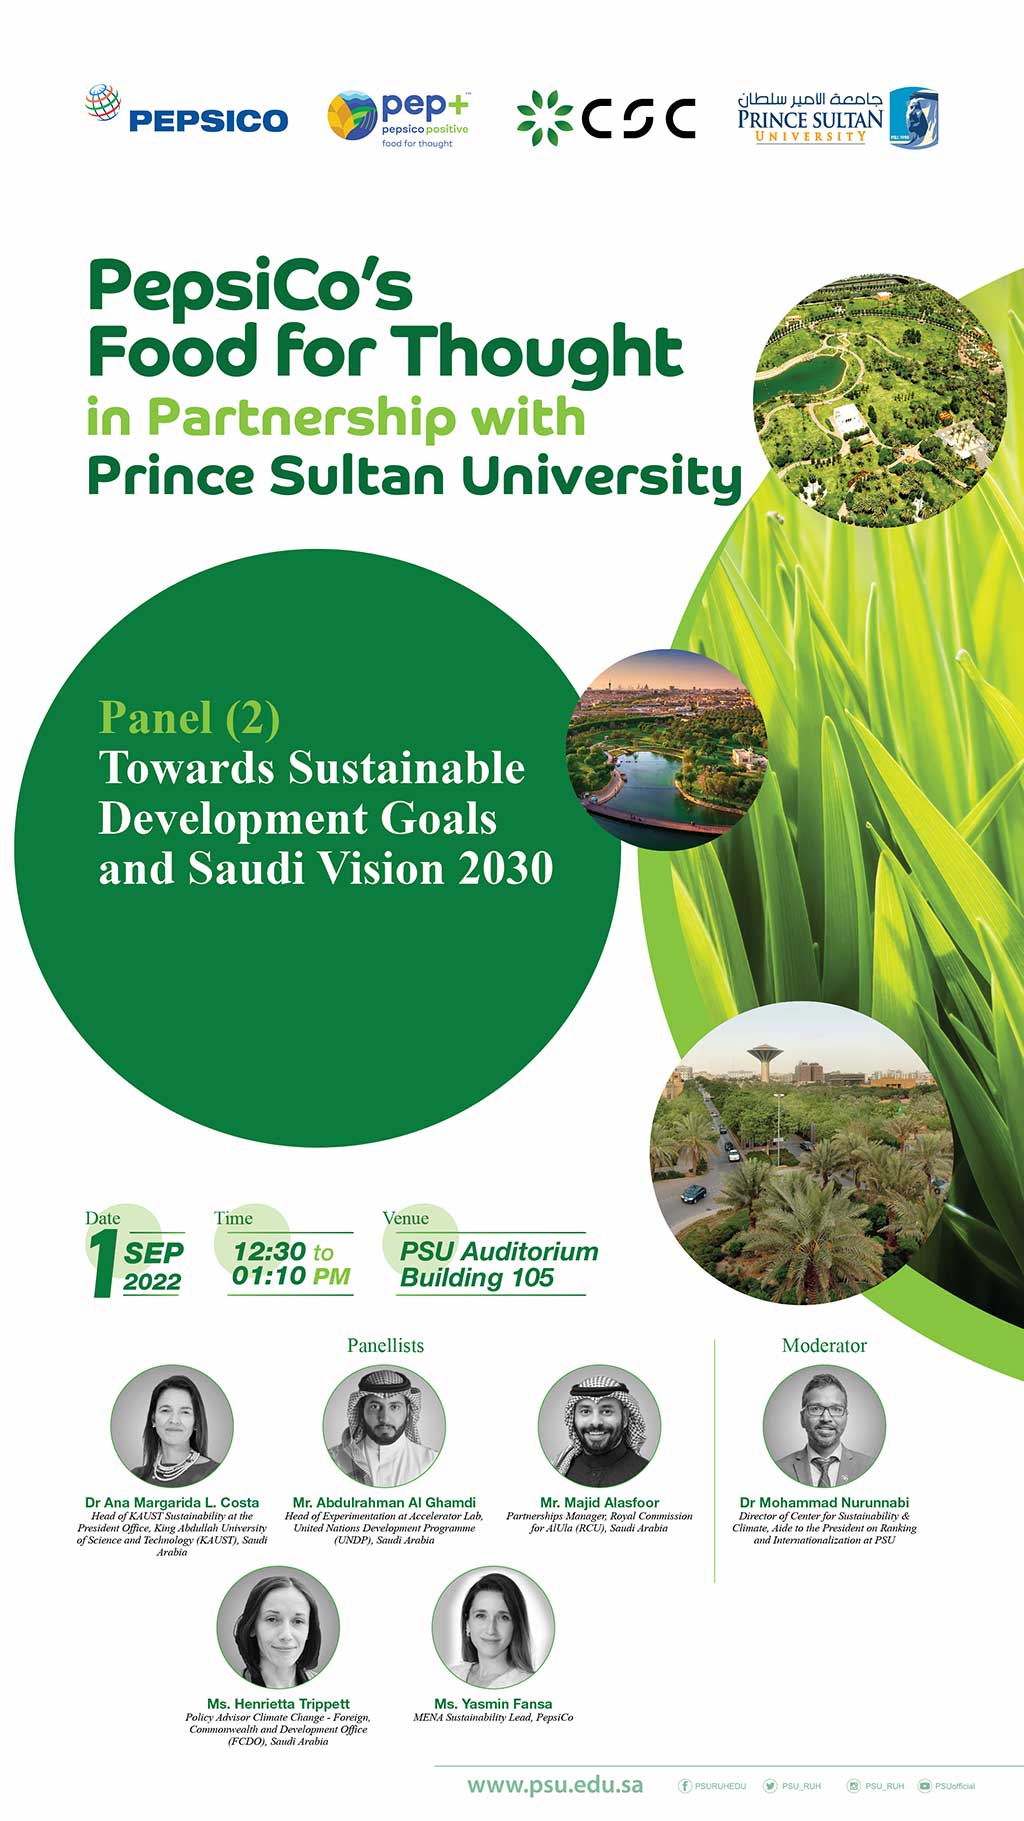 Panel 2: Towards Sustainable Development Goals and Saudi Vision 2030